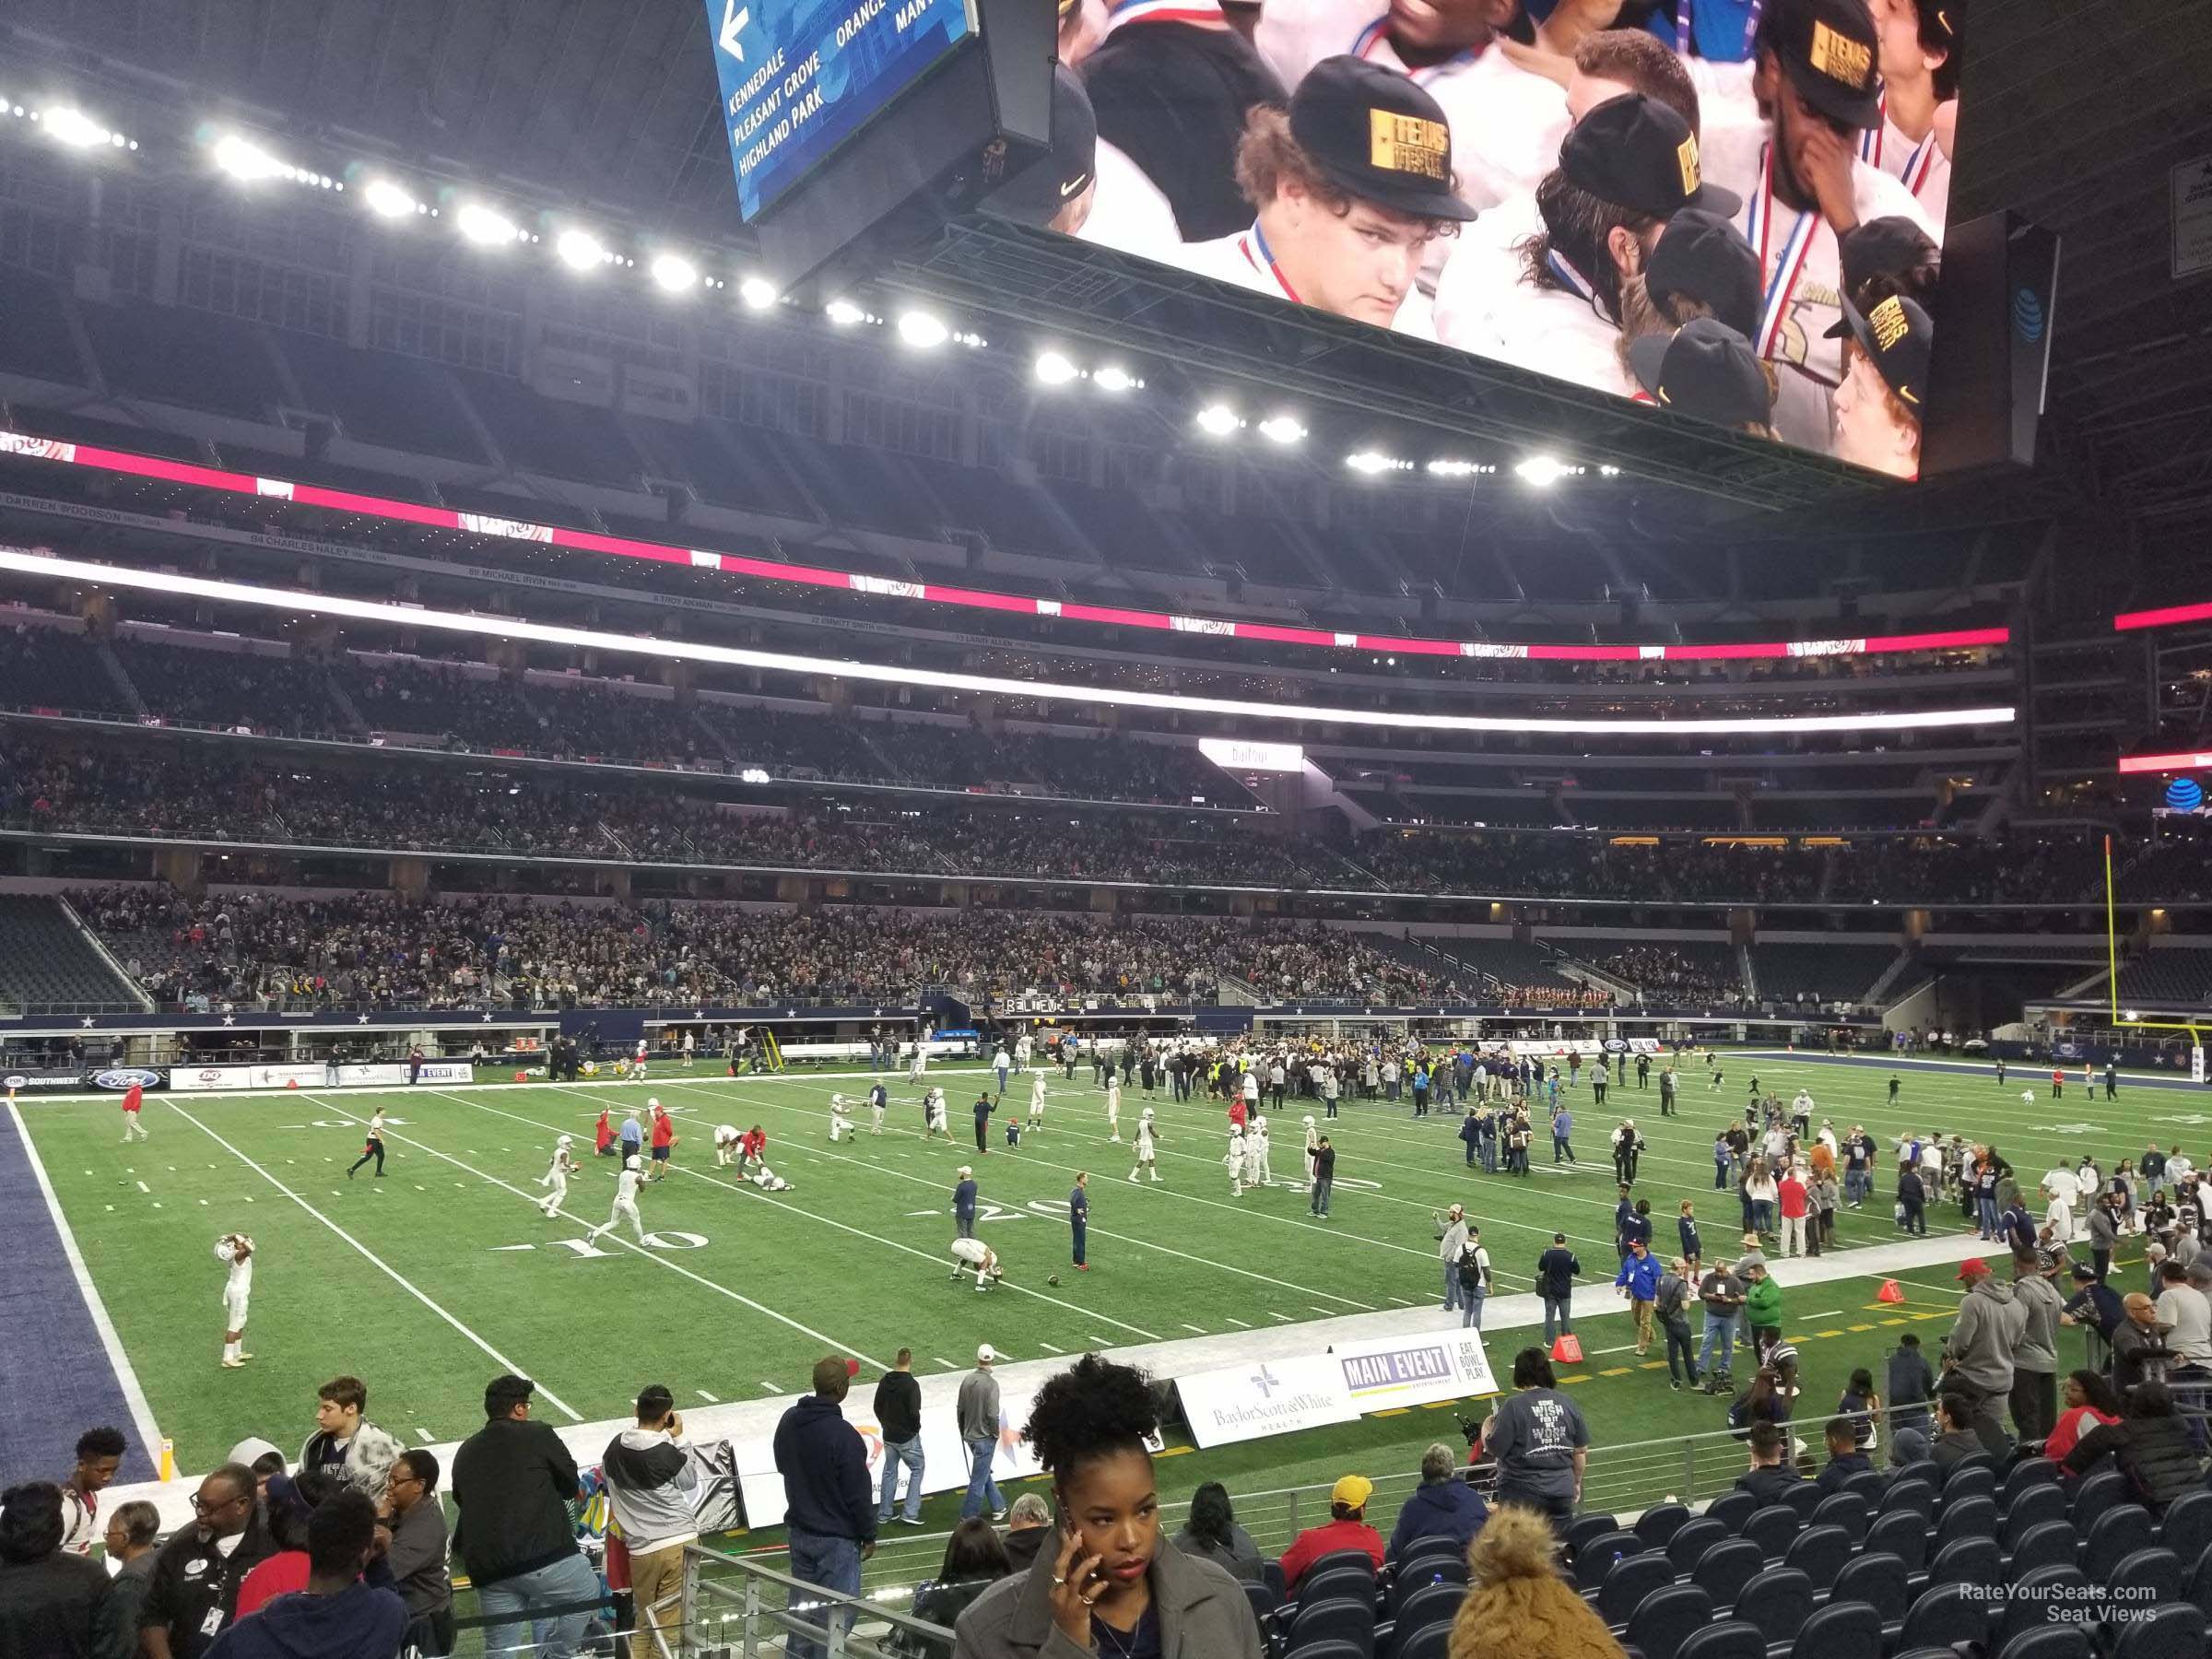 section c115, row 12 seat view  for football - at&t stadium (cowboys stadium)